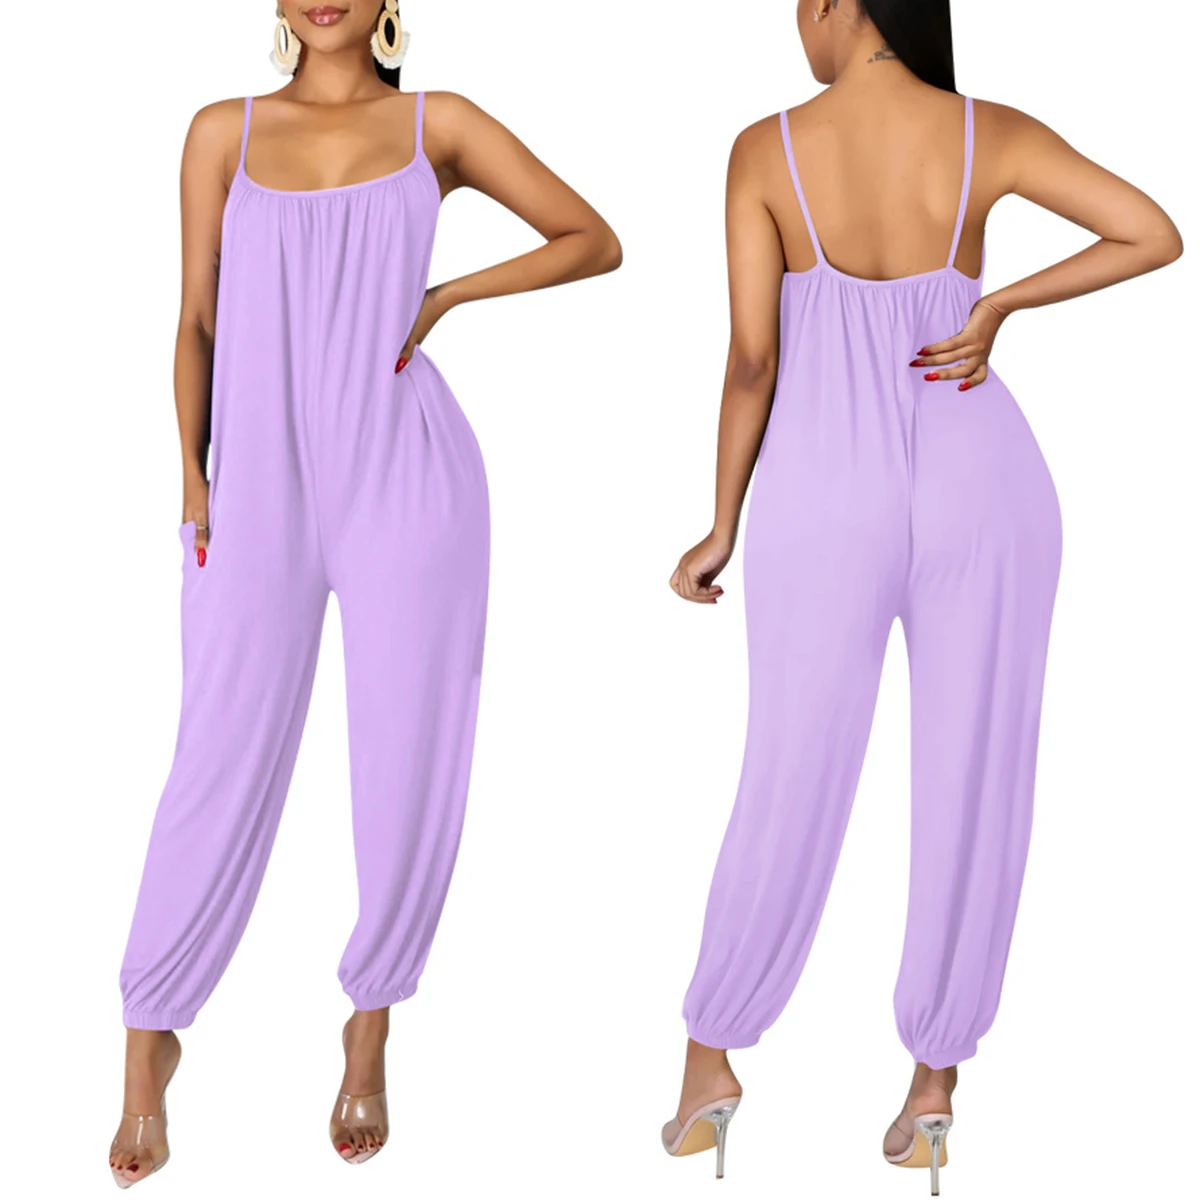 

Jumpsuit Women Summer 2020 Casual Sling Rompers Ropa Mujer Combinaison Femme Macacao Feminino Monos Mujer Dropshipping Free Ship